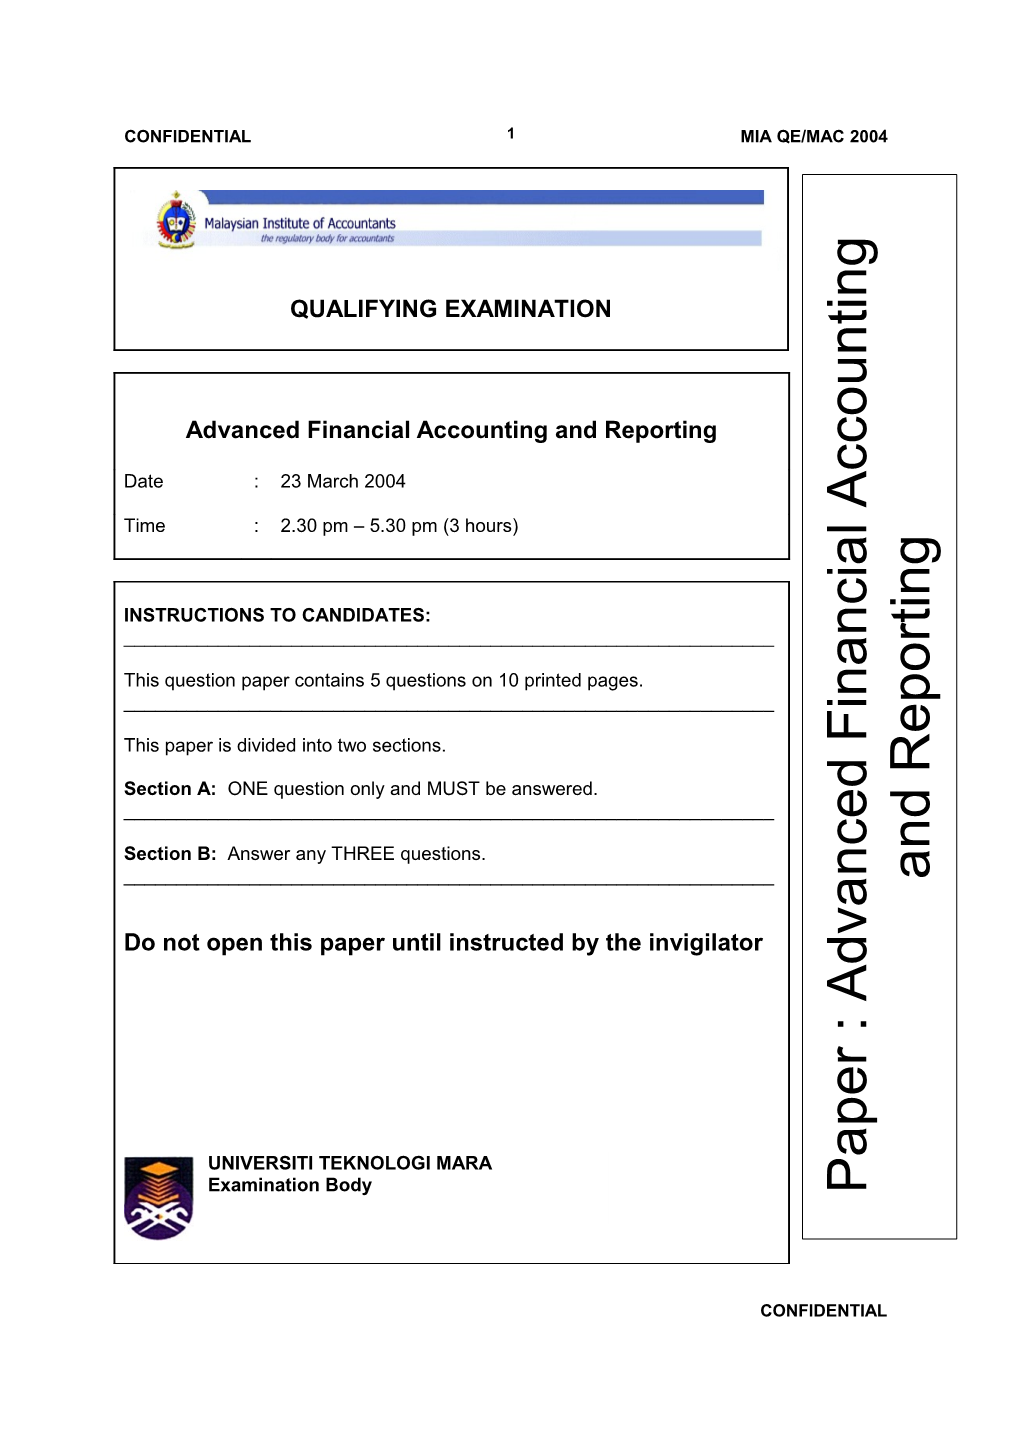 Advanced Financial Accounting and Reporting